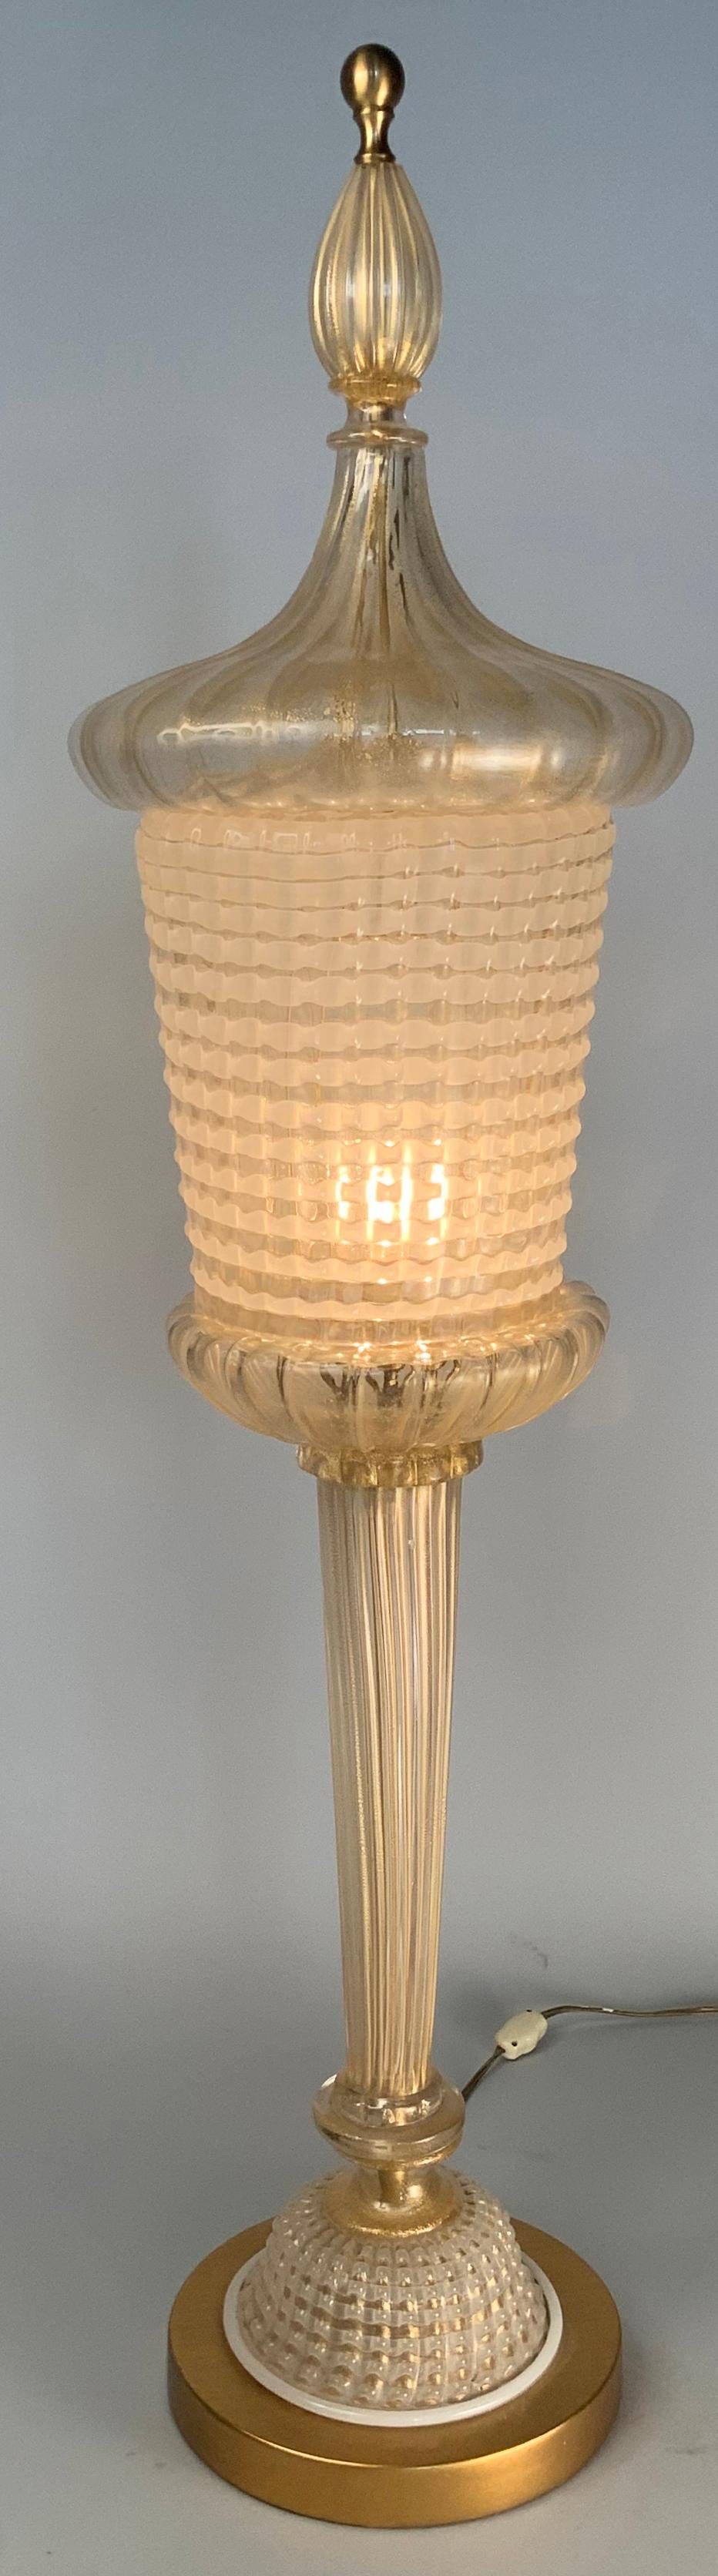 A stunning and rare antique 1940s table lamp in a torch or lantern form entirely of Italian Murano glass designed by Barovier. Beautiful glass with gold leaf and bubbles swirled into the glass. Mounted on a gold leafed wood base.